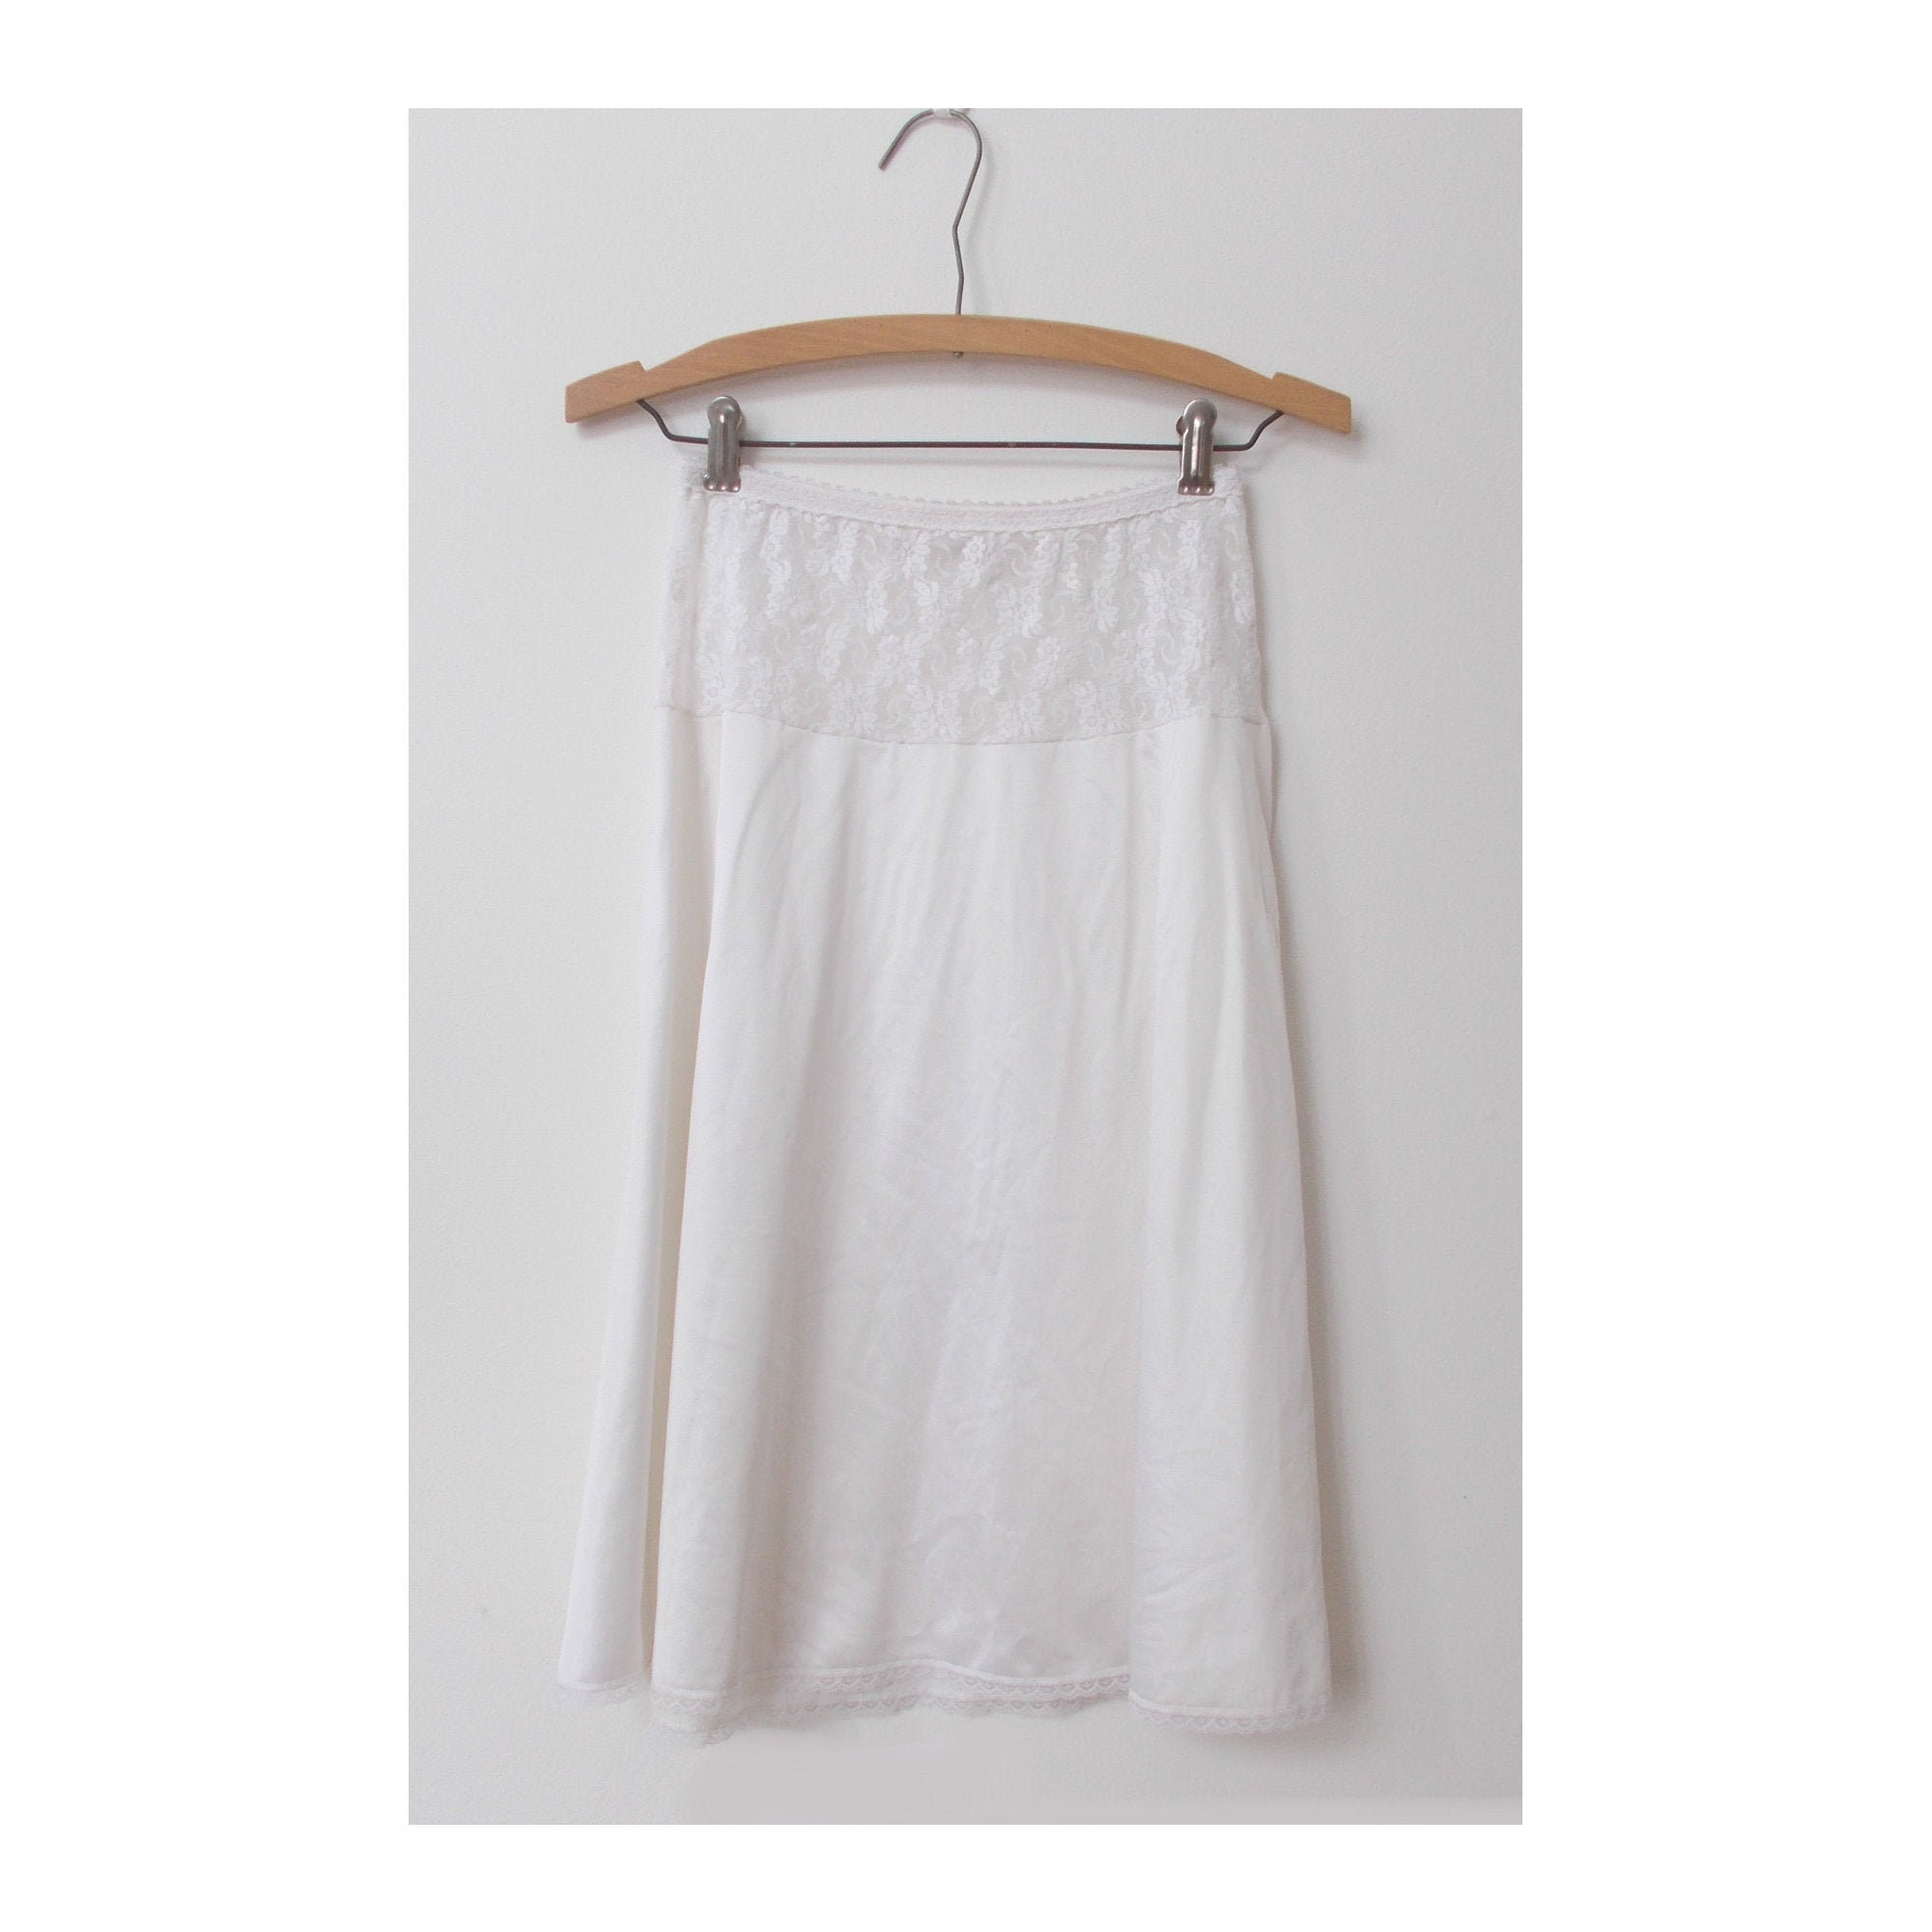 Vintage White A-line Half Slip With Stretch Lace Panel 